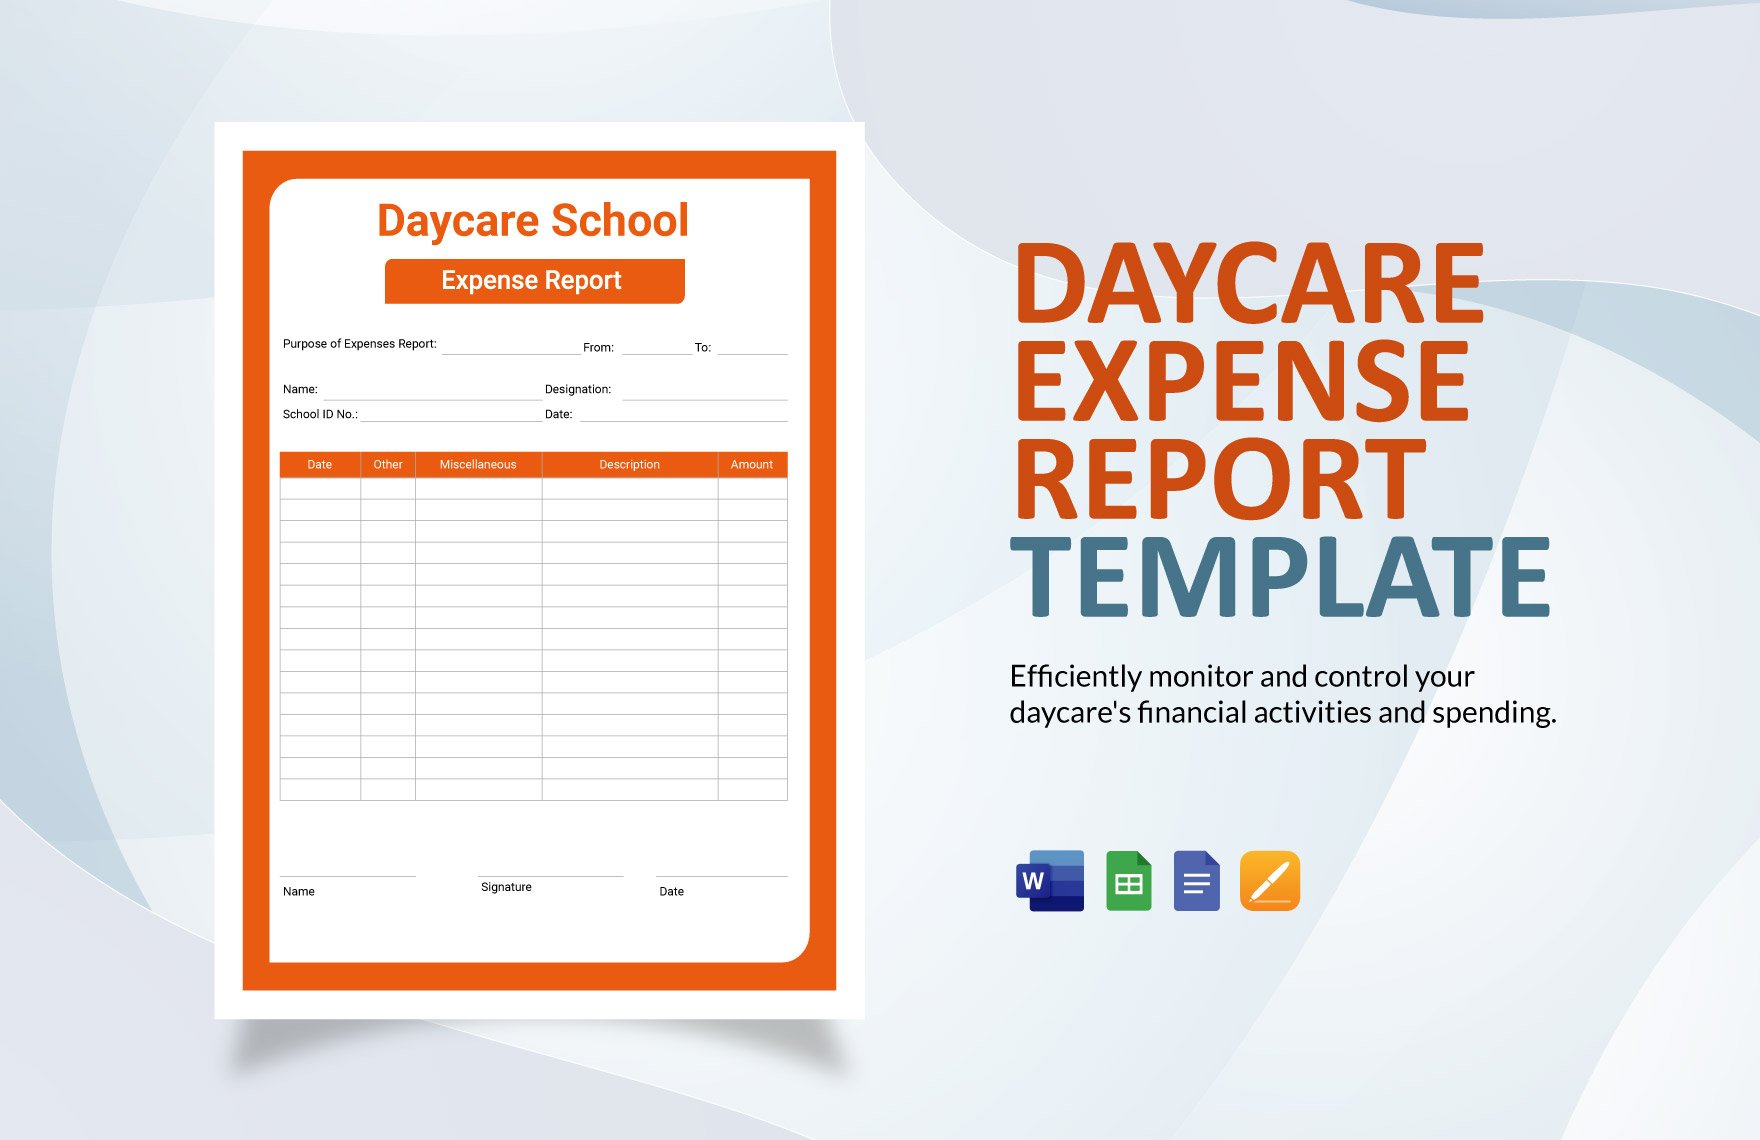 Daycare Expense Report Template in Word, Google Docs, Google Sheets, Apple Pages